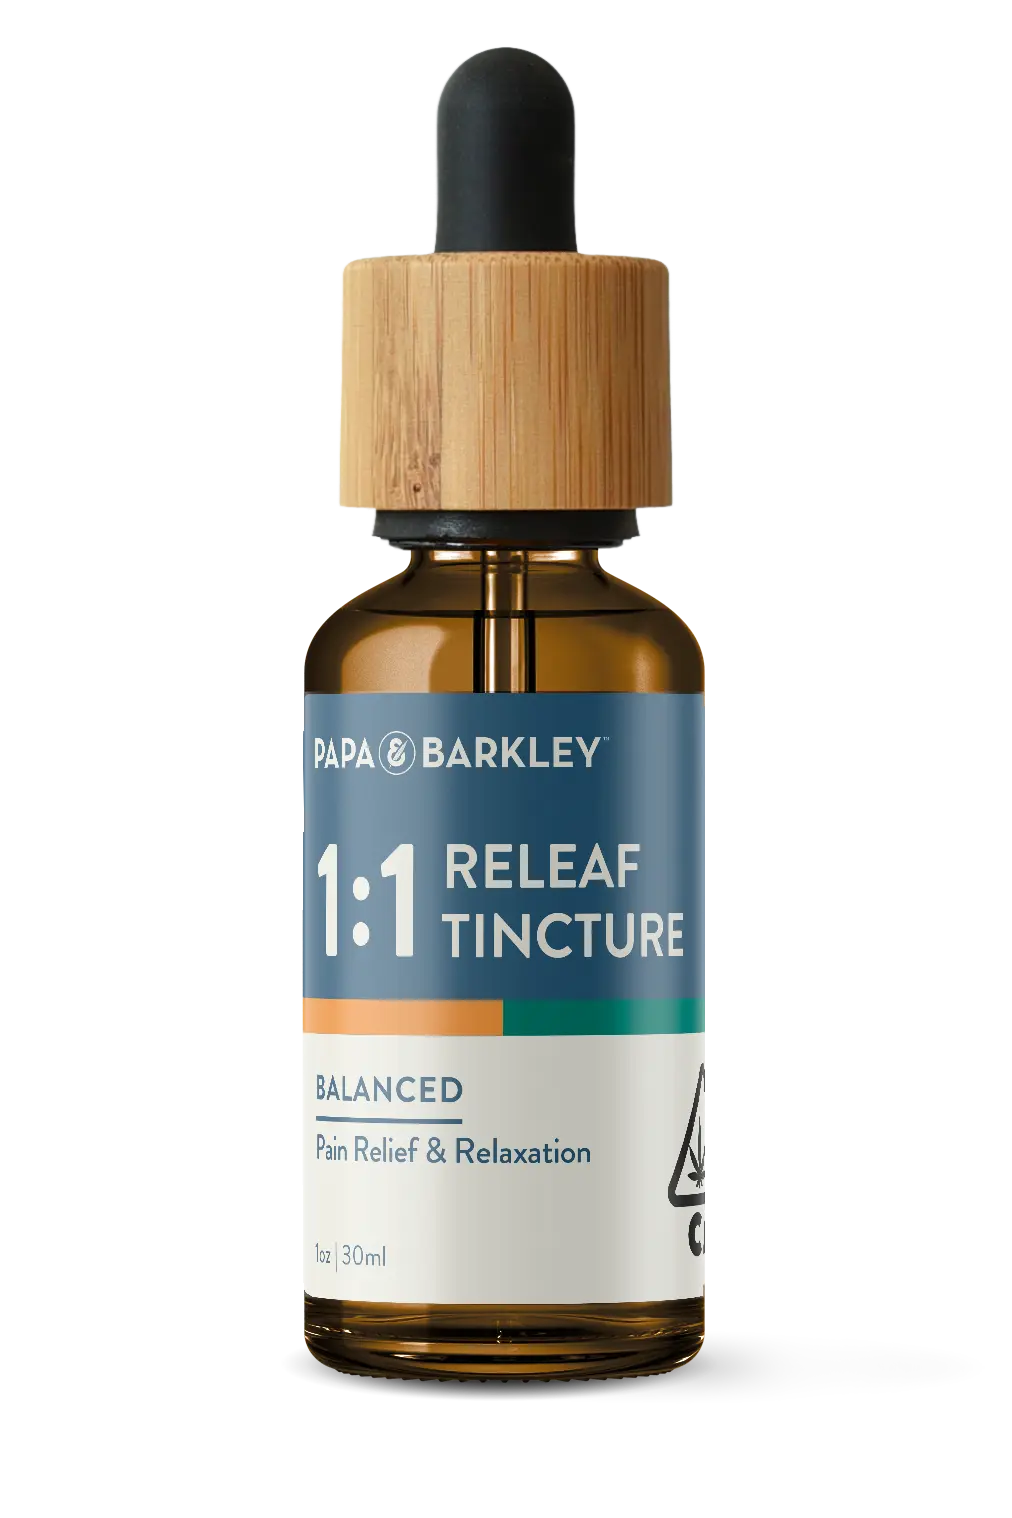 product preview image for Balanced 1:1 Releaf Tincture - 30ml